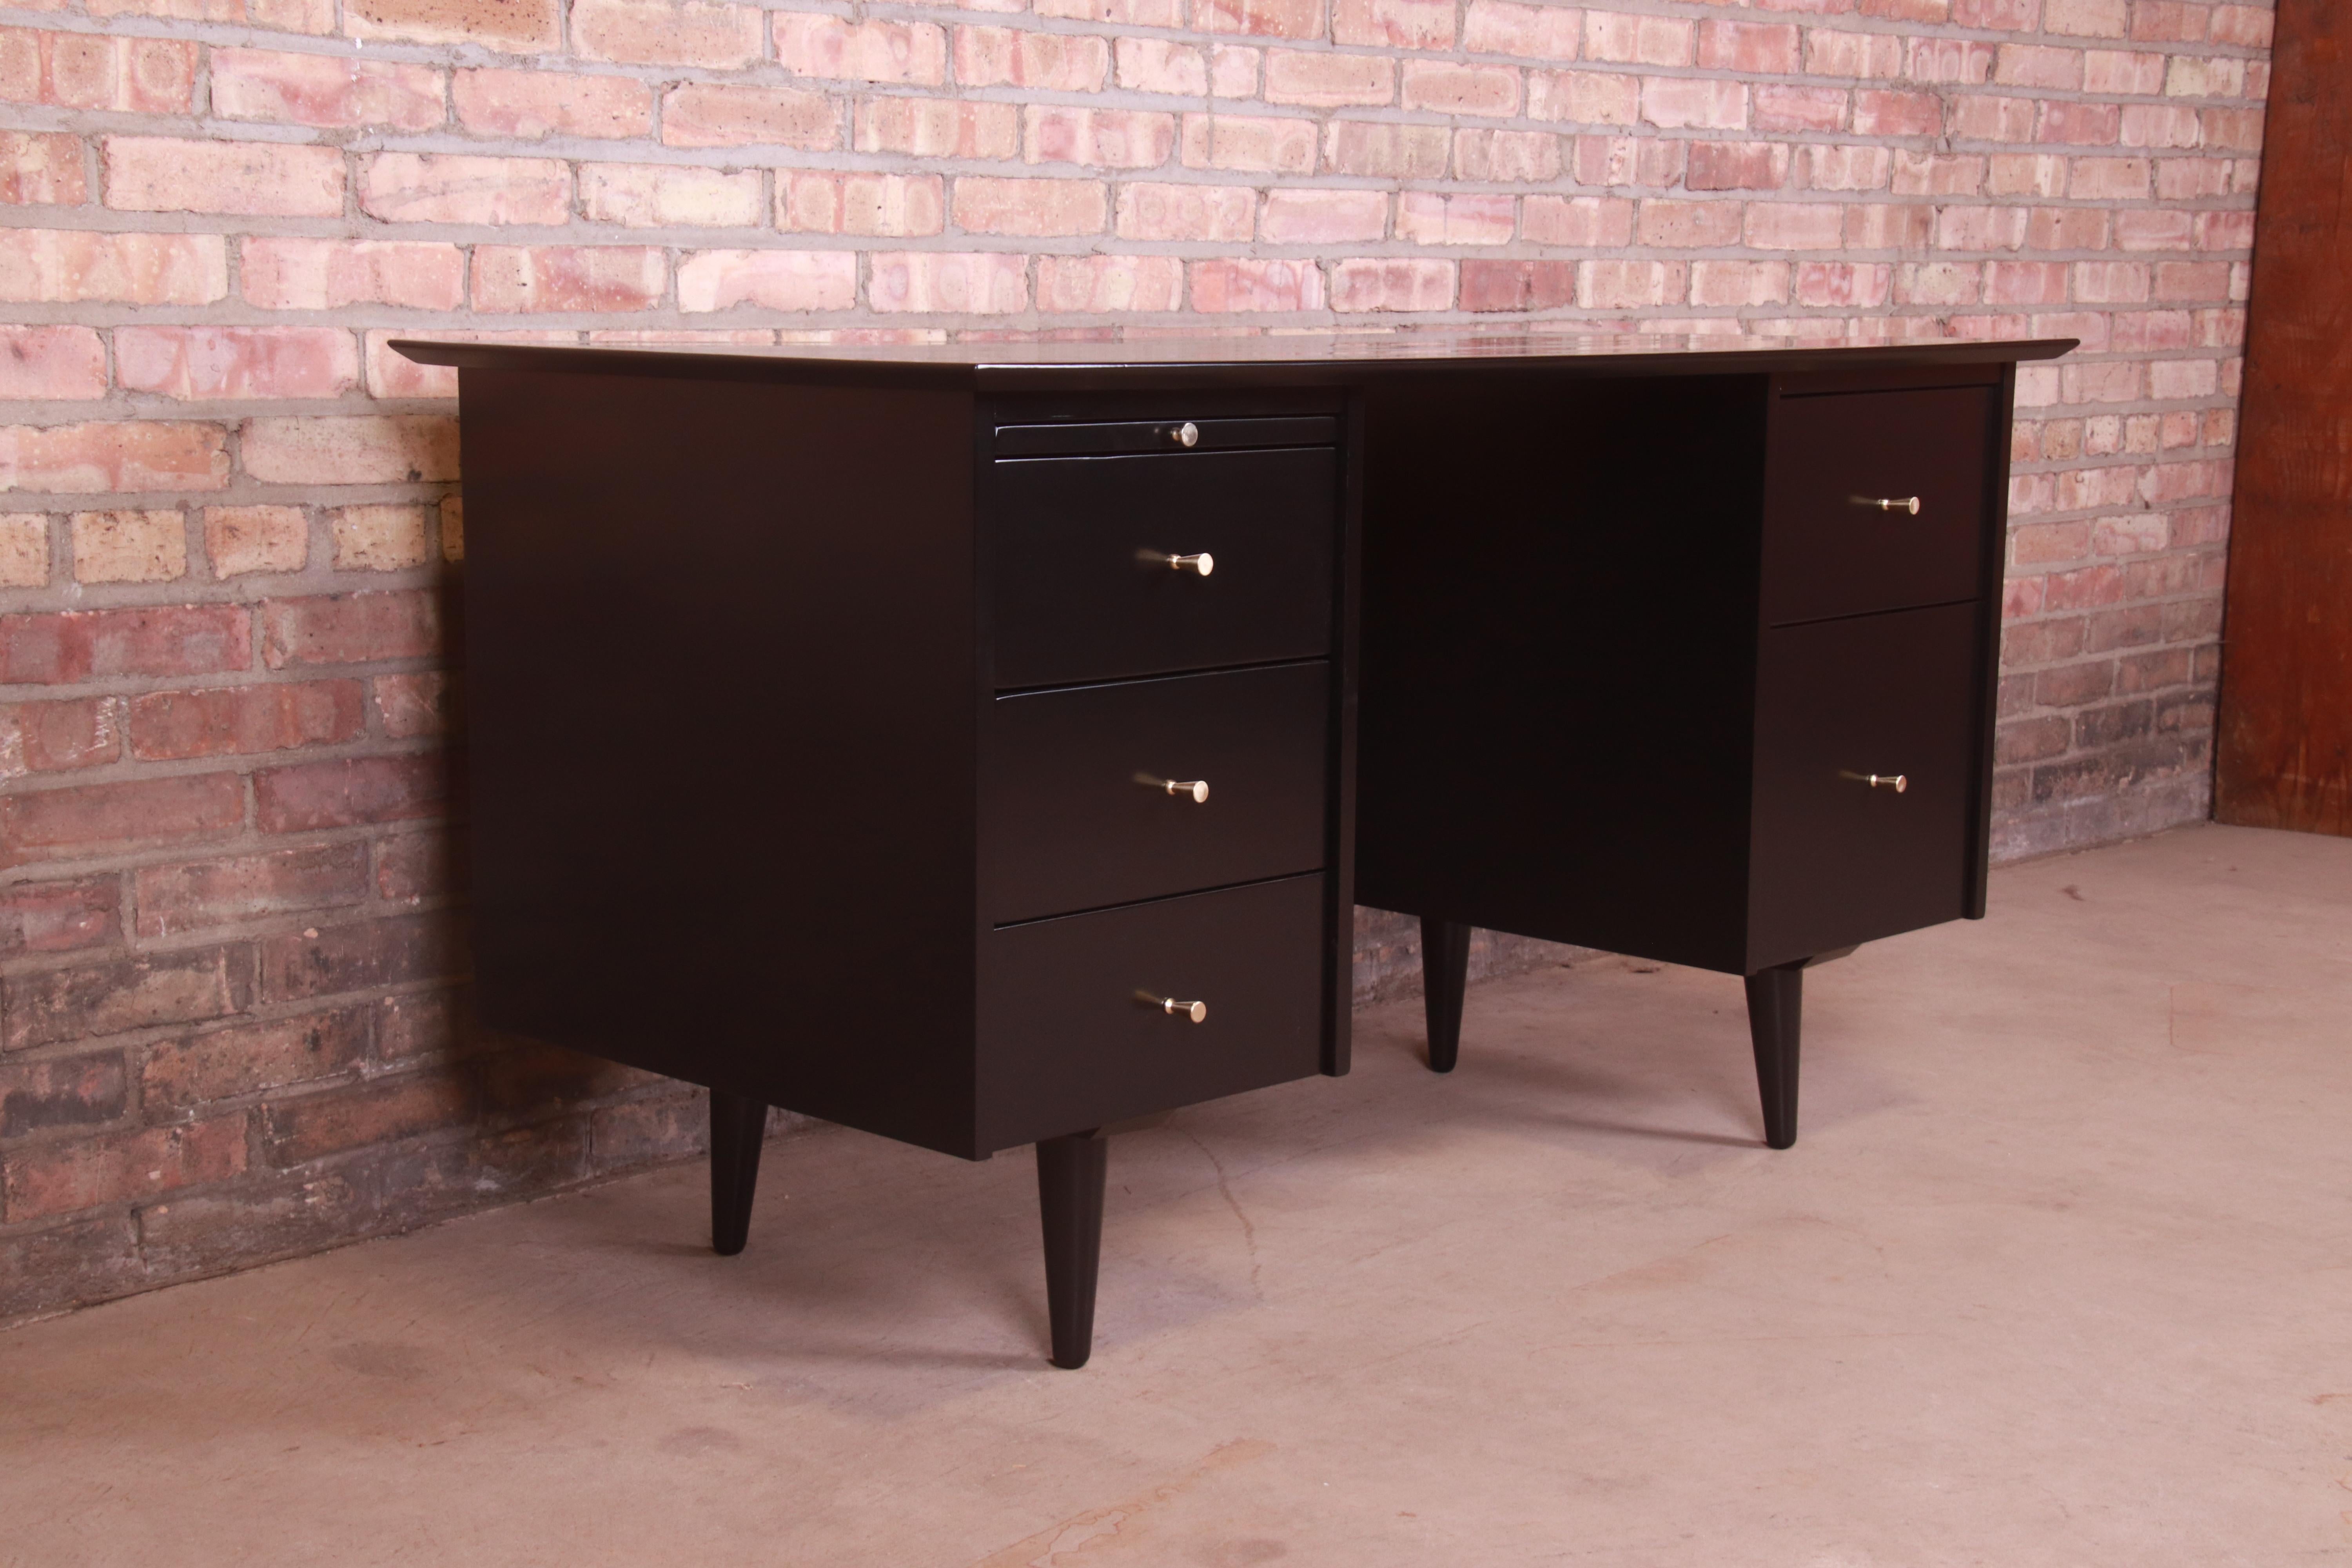 Mid-20th Century Paul McCobb Planner Group Black Lacquered Double Pedestal Desk, Newly Refinished For Sale